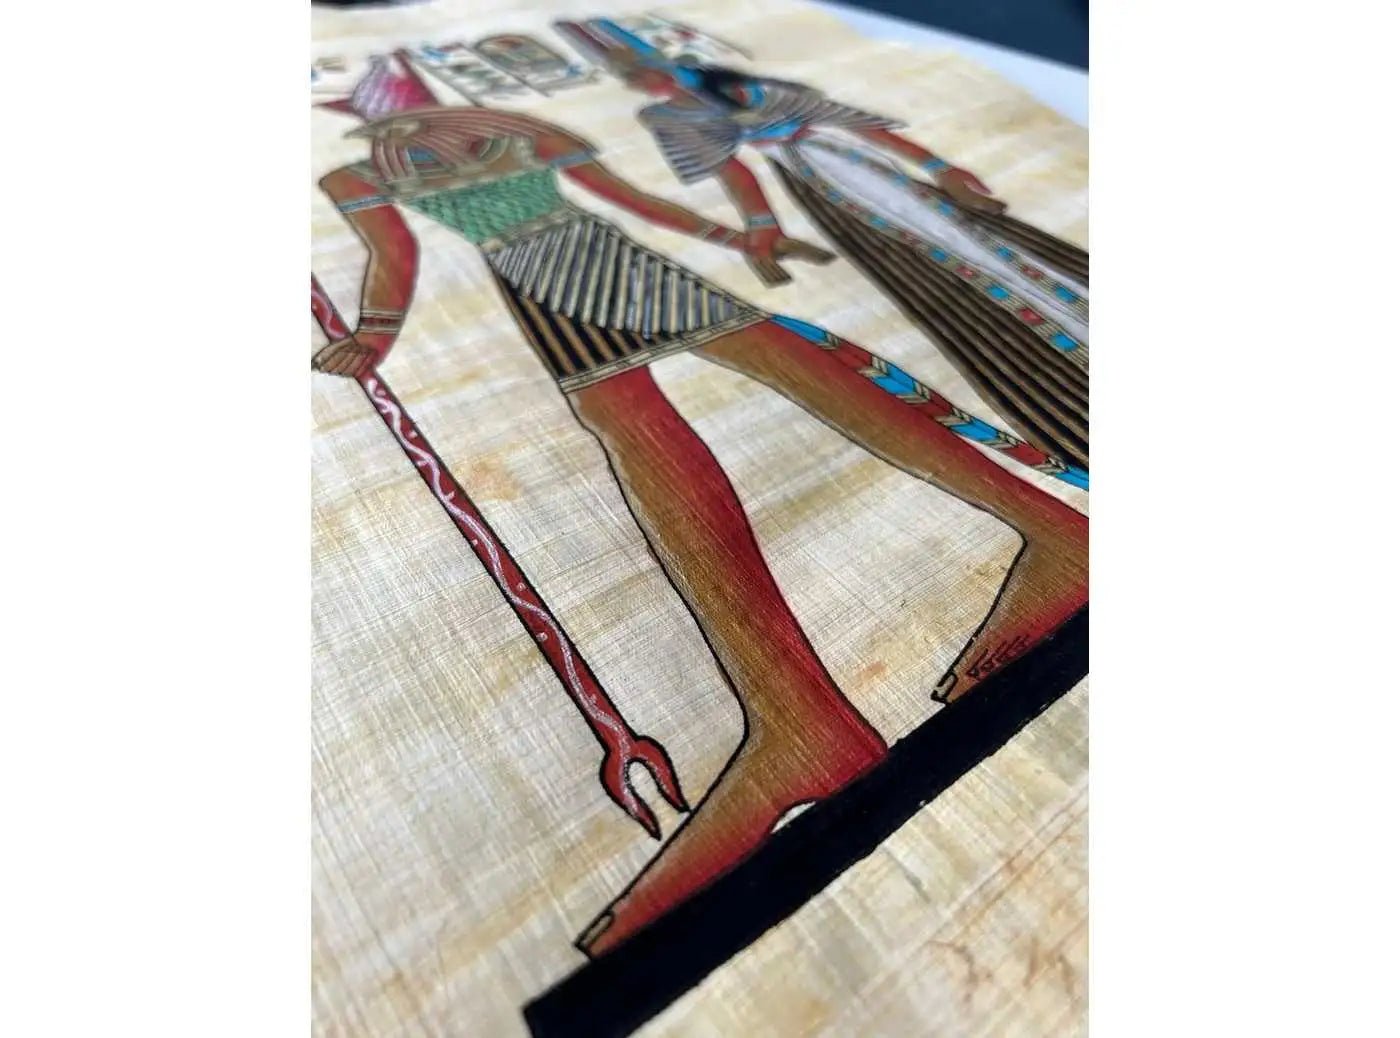 Egypt Gods Paper - Queen Nefertari and Goddess Isis Sacred Ritual • Authentic Papyrus Art of Ancient Egypt • Egypt Decor